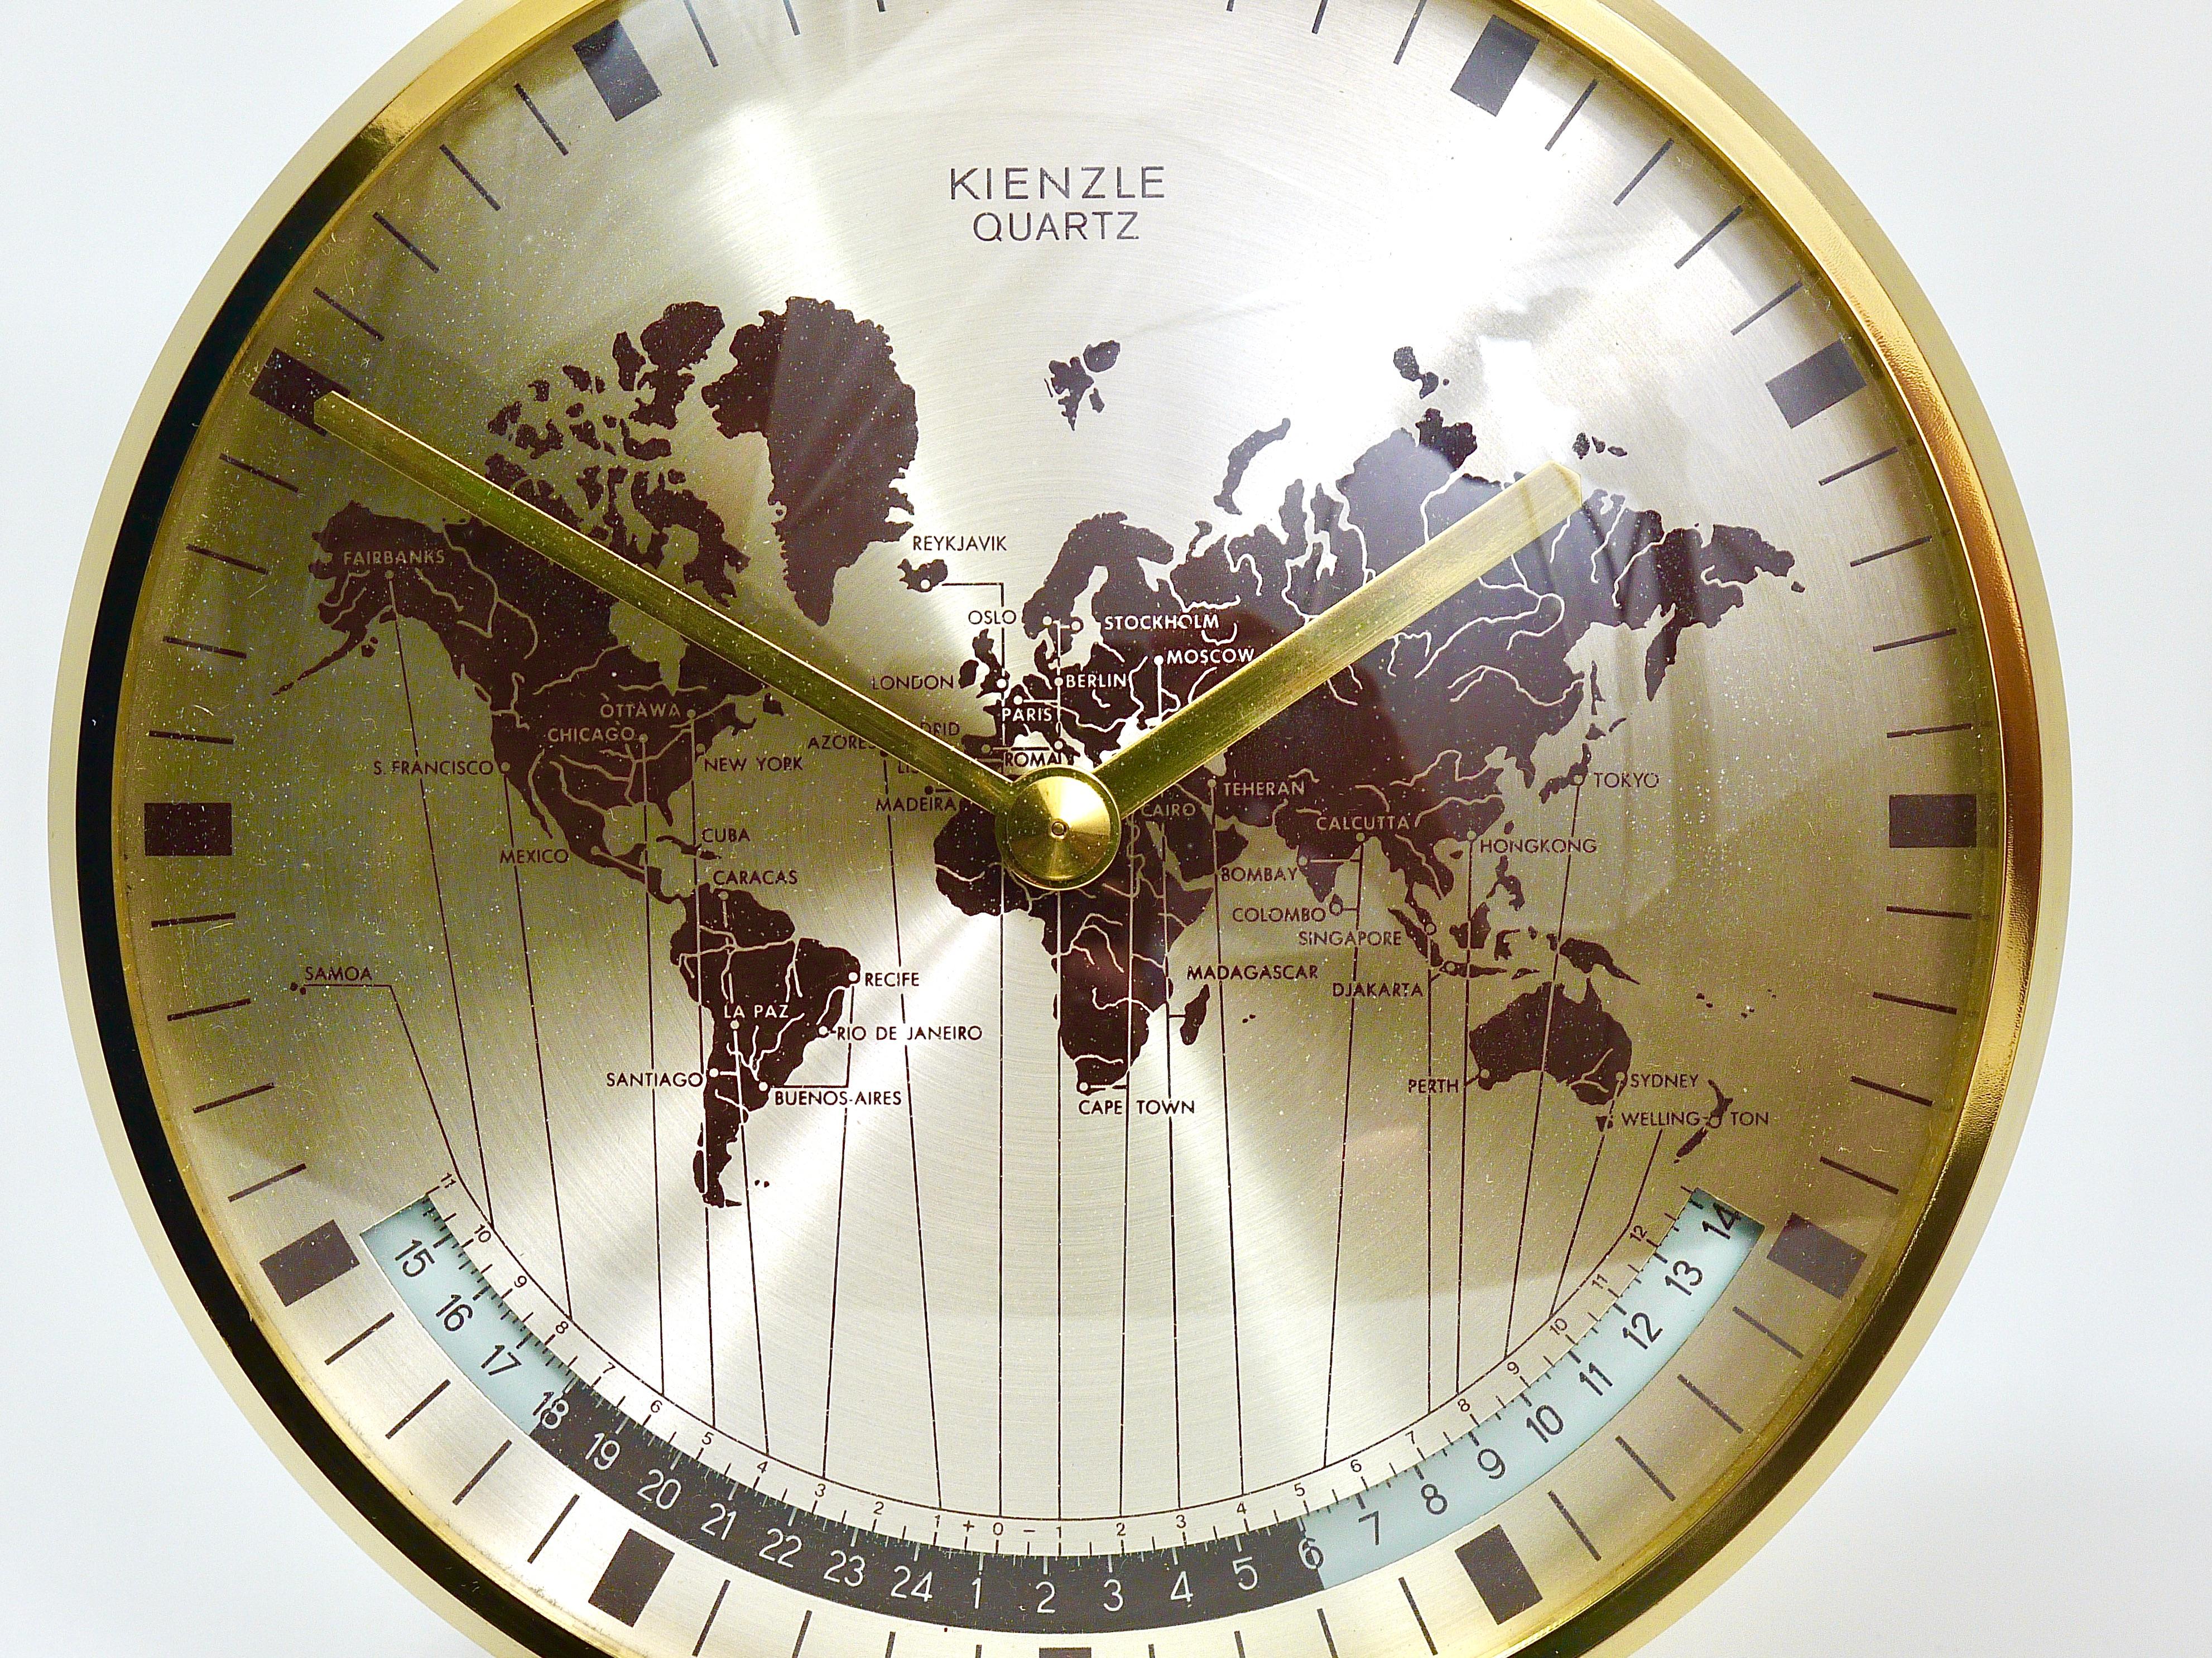 A beautiful modernist brass desk clock with a world map clocks face and world time zones. Executed in the 1960s by Kienzle, Germany. Original battery movement. In very good condition.